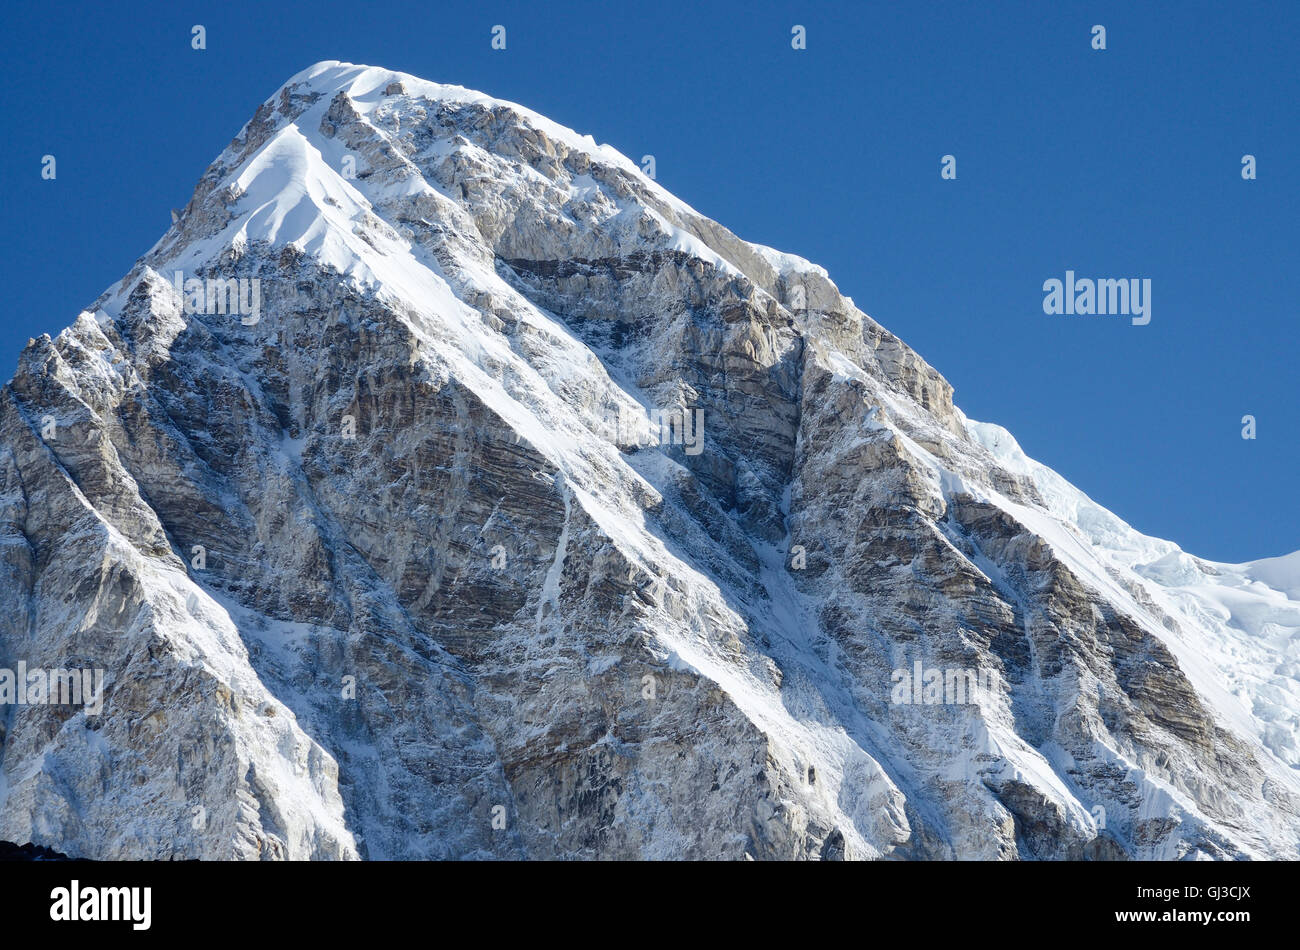 Summit of Kala Patthar mountain - most accessible point to view Mt. Everest from base camp to peak,Nepalese Himalayas Stock Photo